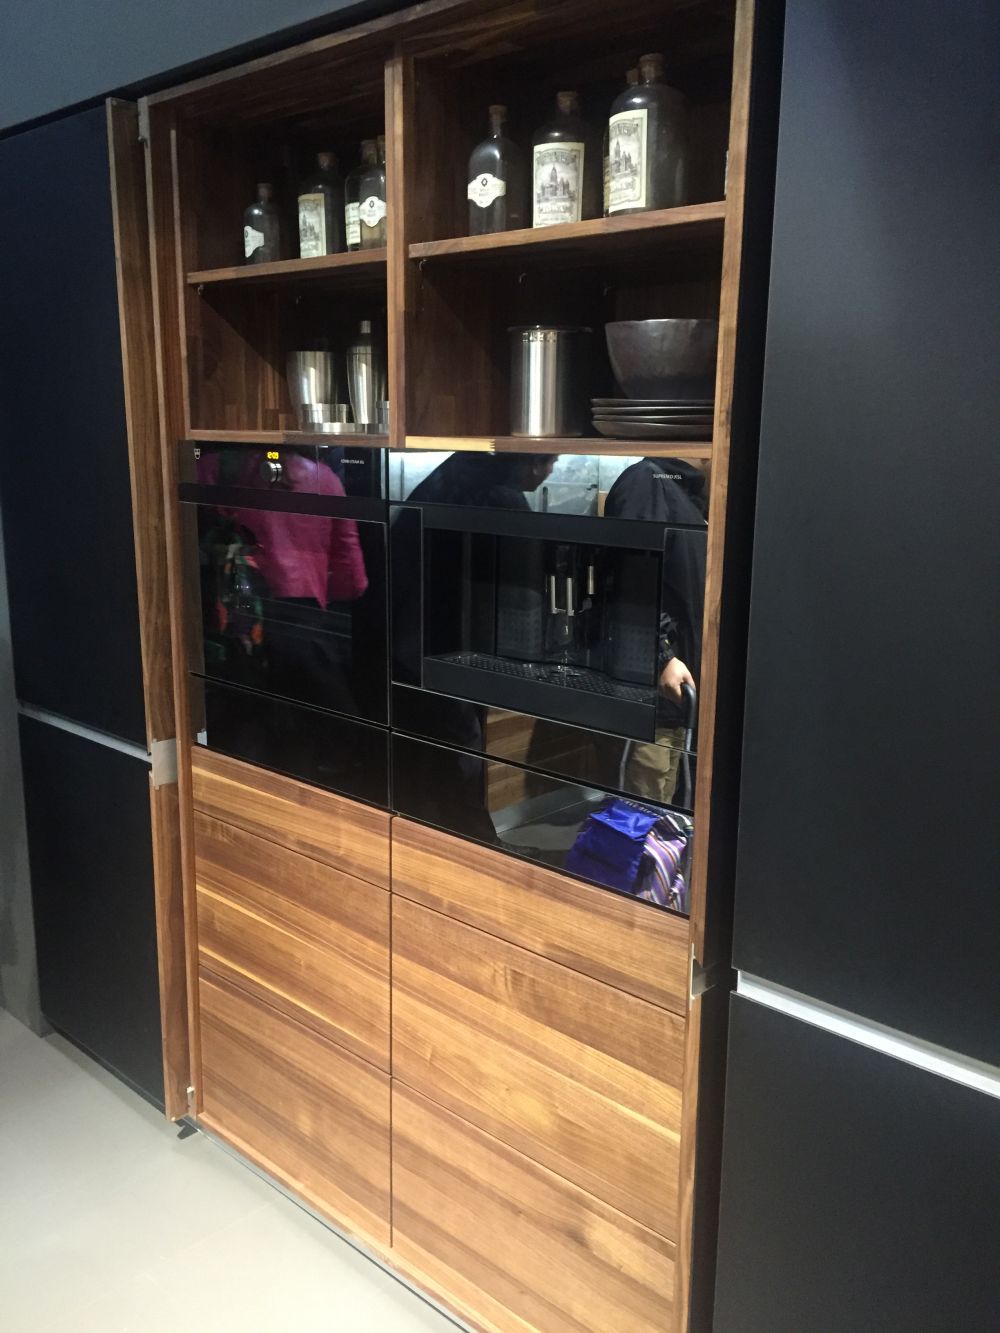 Black kitchen with pocket doors that help to hide appliances